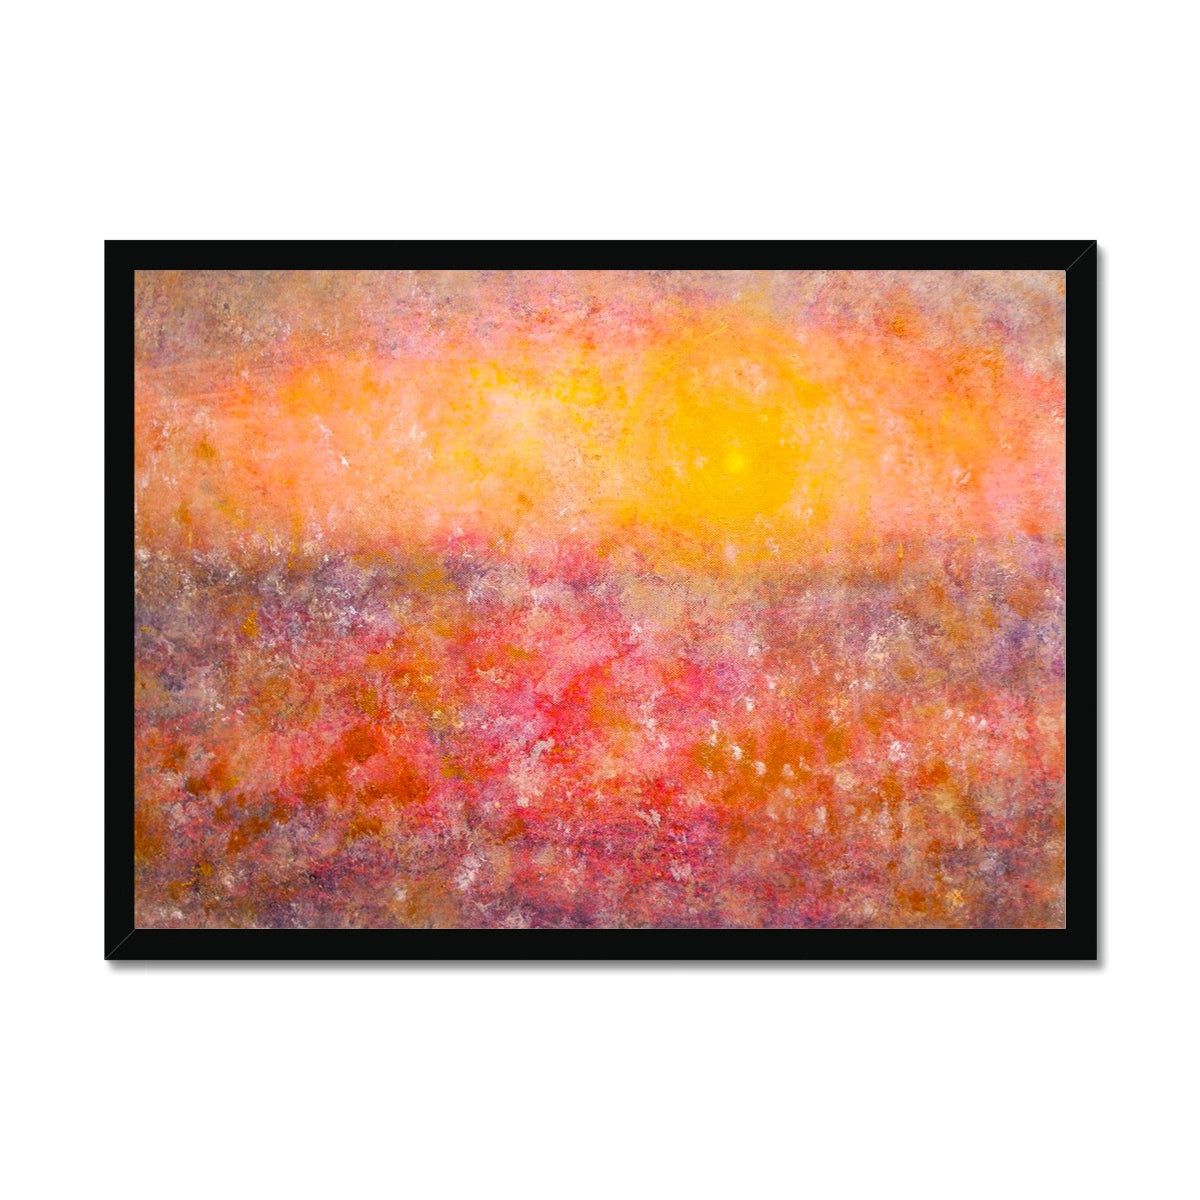 Sunrise Mist Horizon Abstract Painting | Framed Prints From Scotland-Framed Prints-Abstract & Impressionistic Art Gallery-A2 Landscape-Black Frame-Paintings, Prints, Homeware, Art Gifts From Scotland By Scottish Artist Kevin Hunter